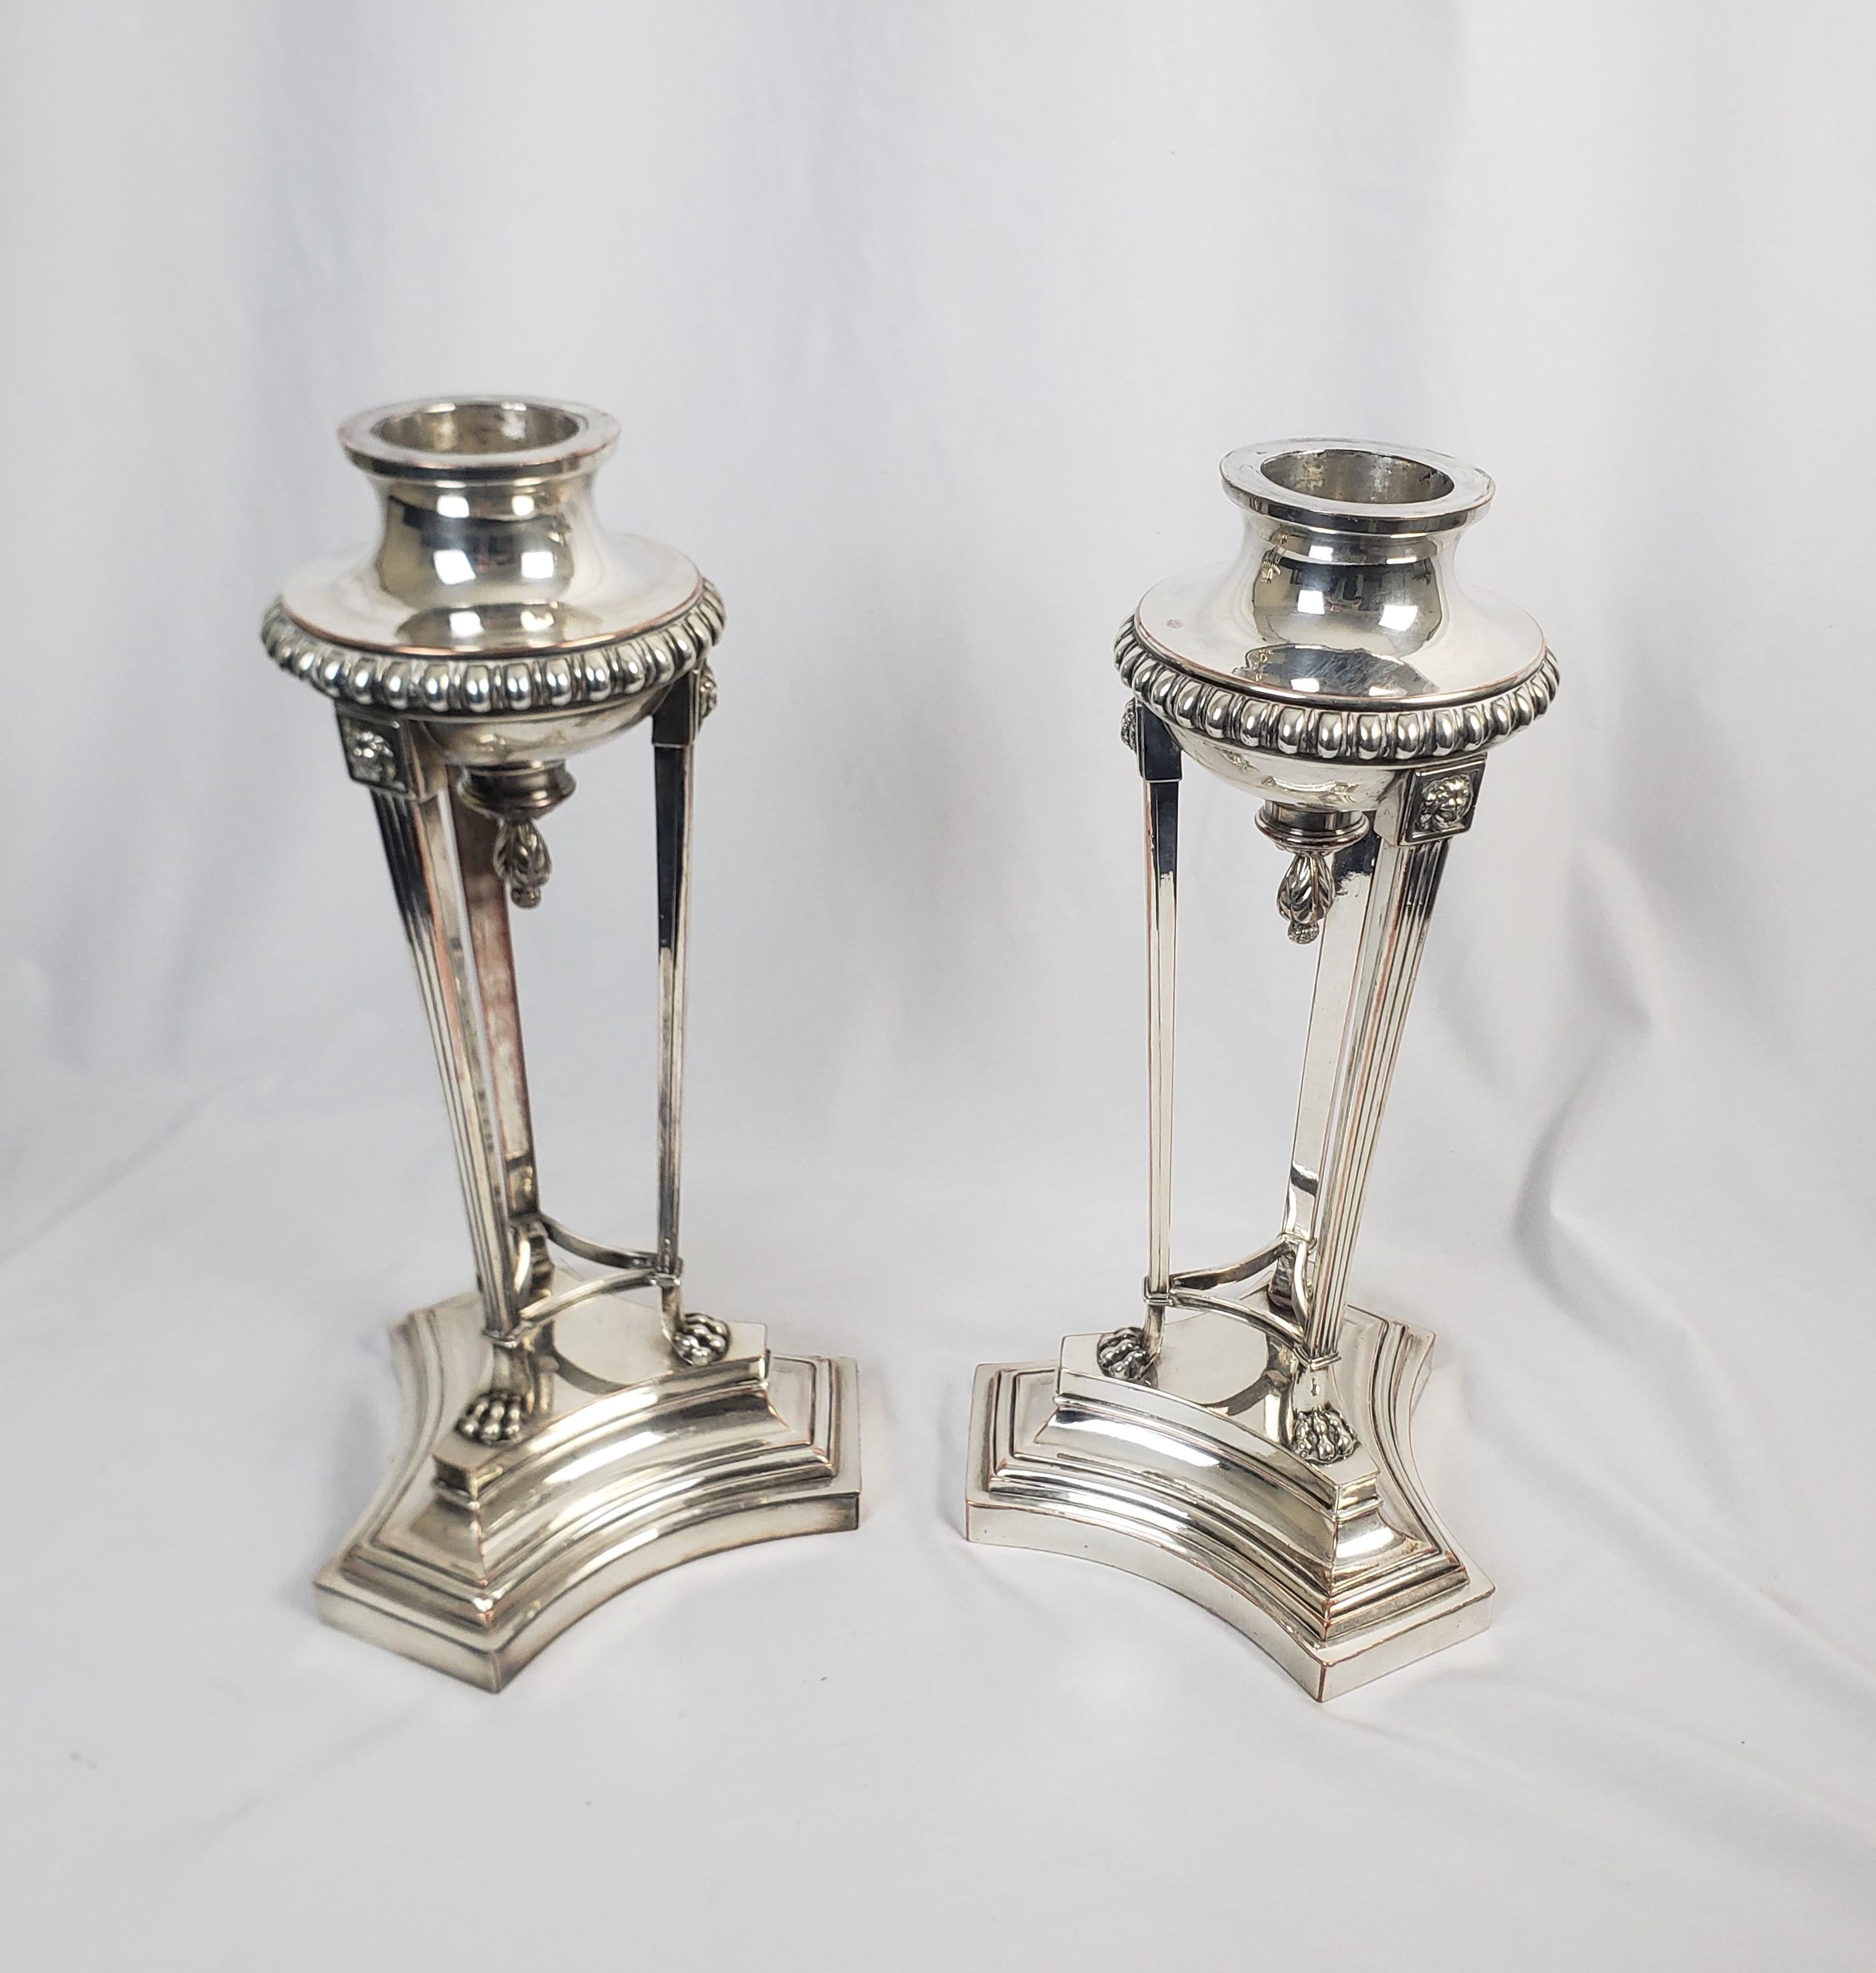 Pair of Huge Antique Matthew Boulton Regency Three Arm Silver Plated Candelabras For Sale 7